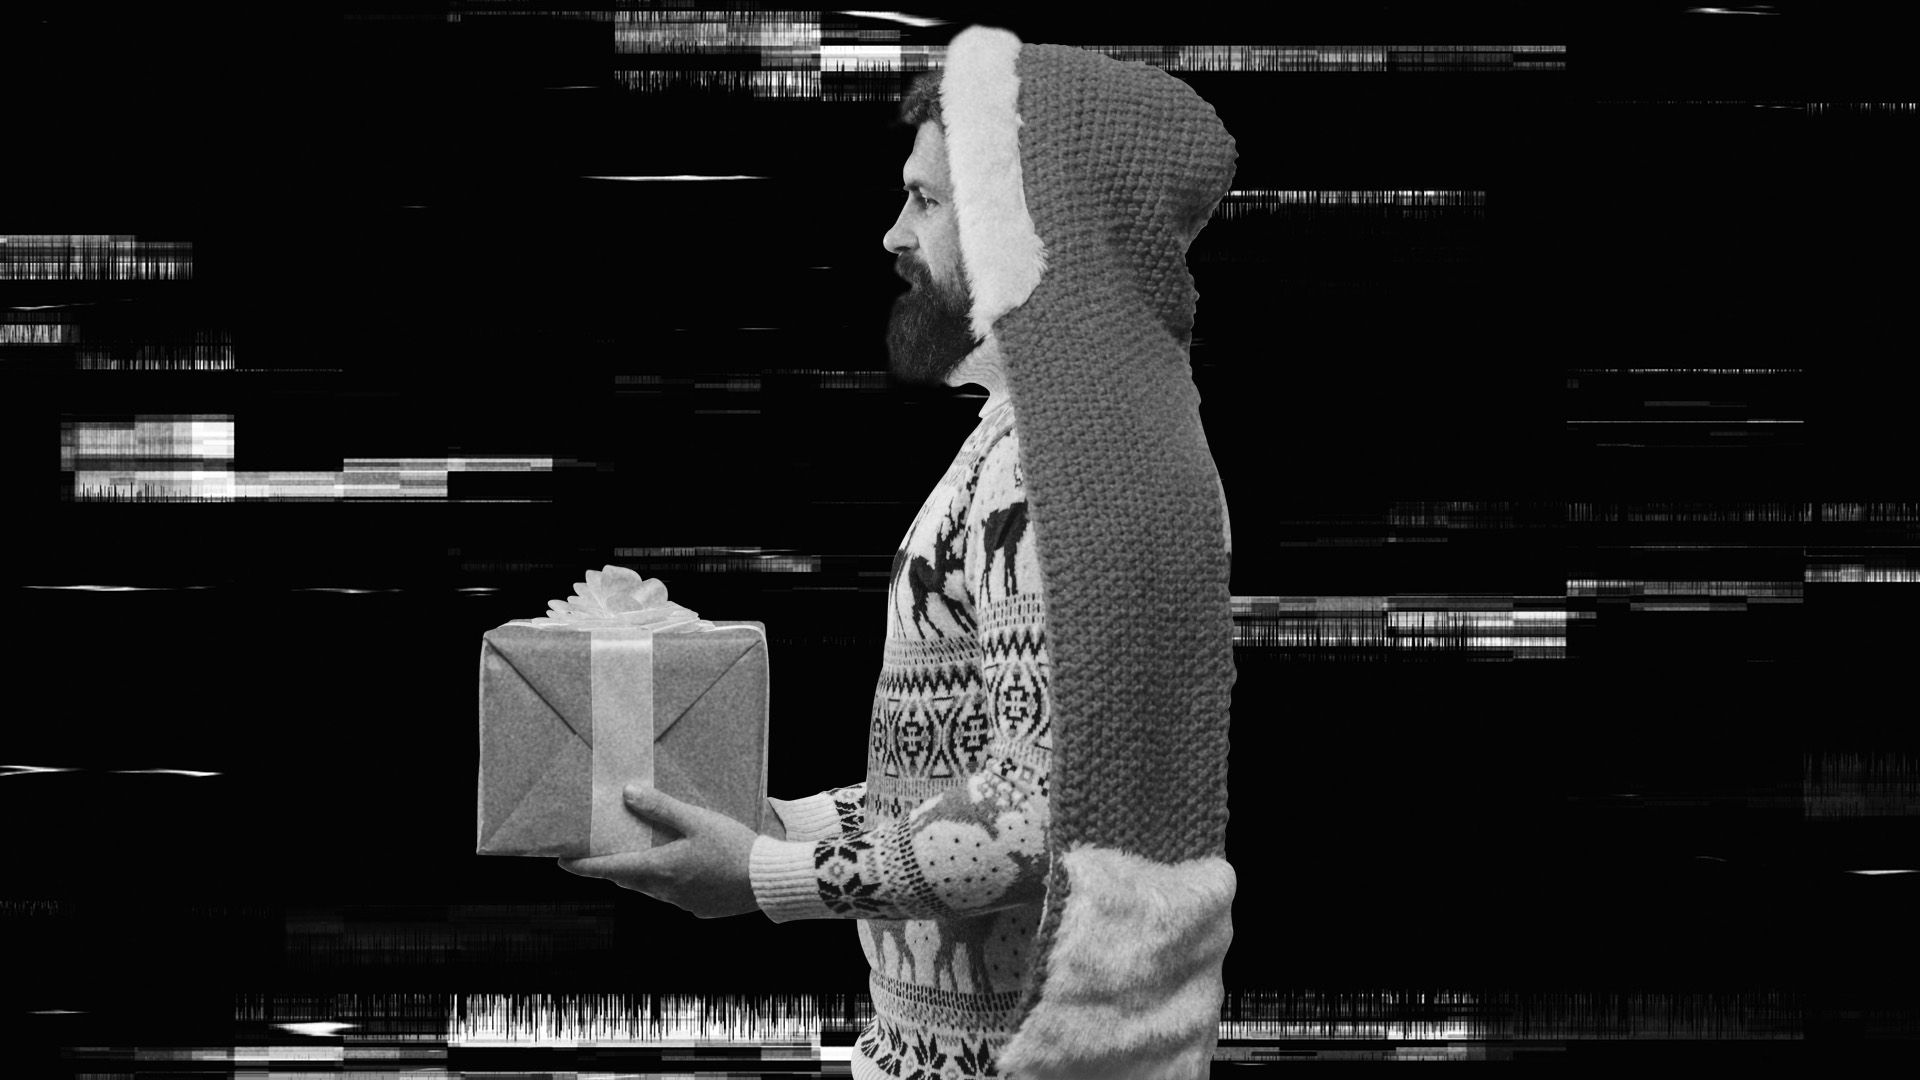 A photo of a man in a holiday sweater carrying a gift.